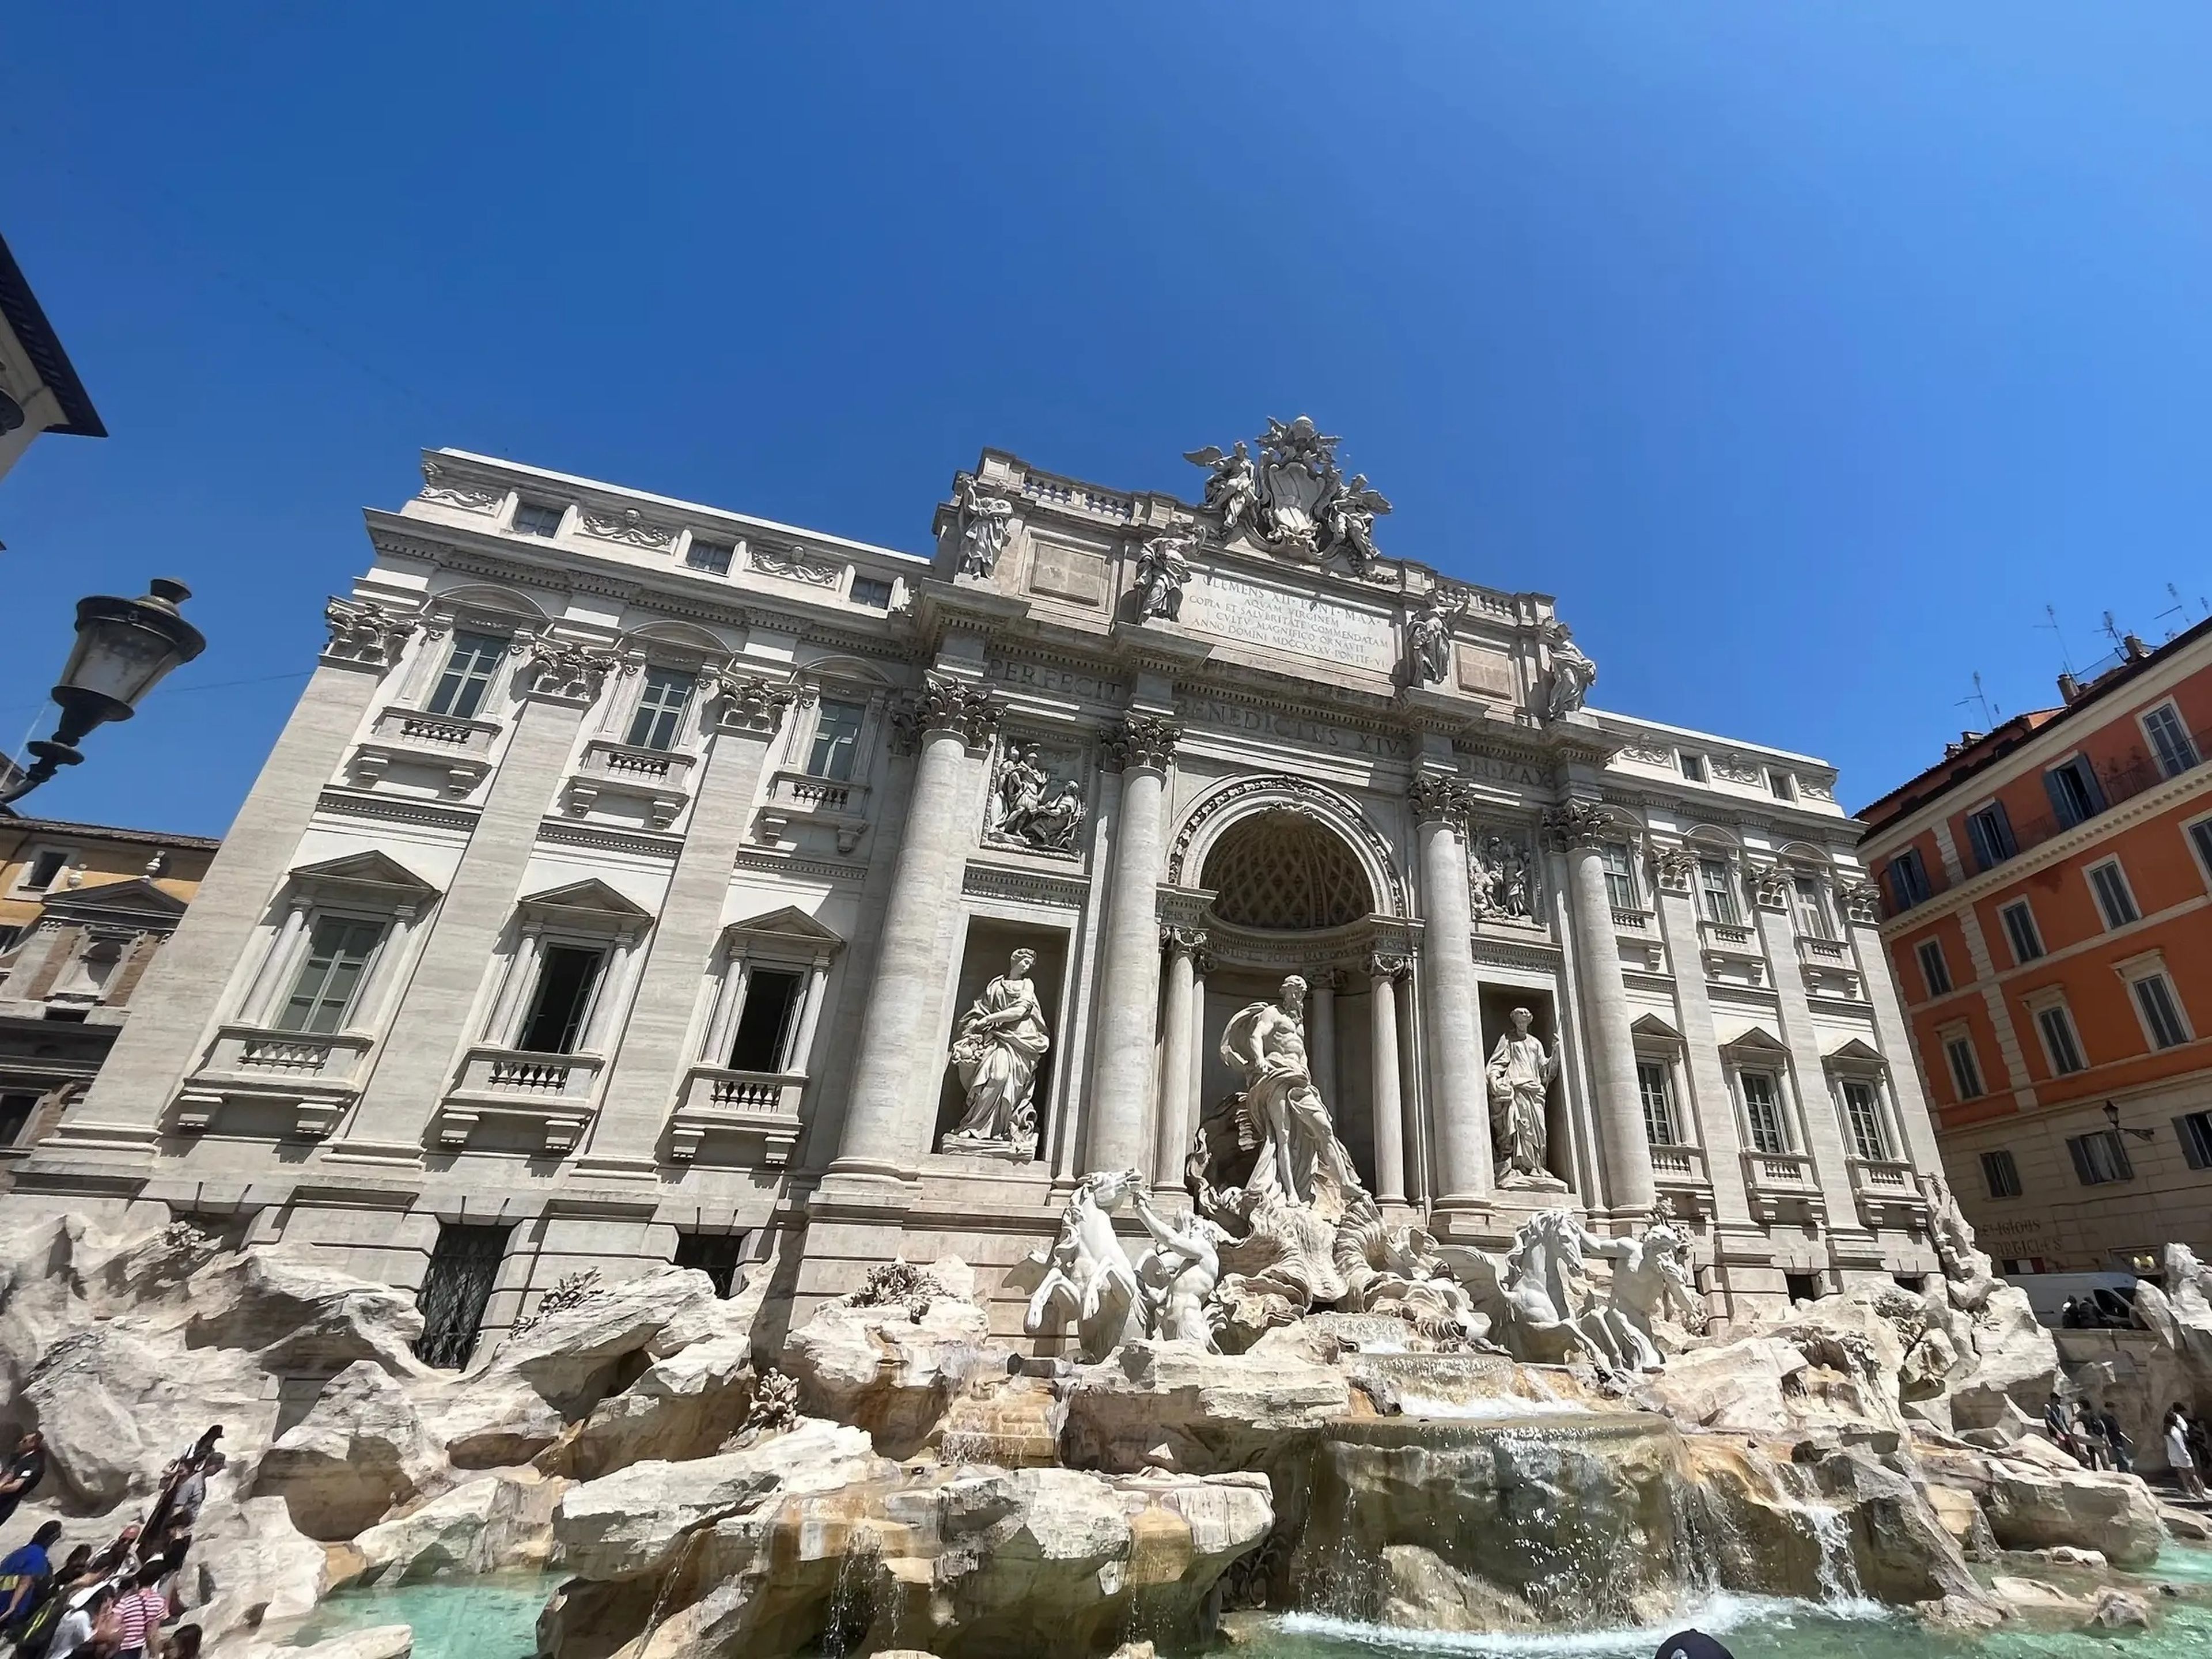 shot of the trevi fountain in rome italy